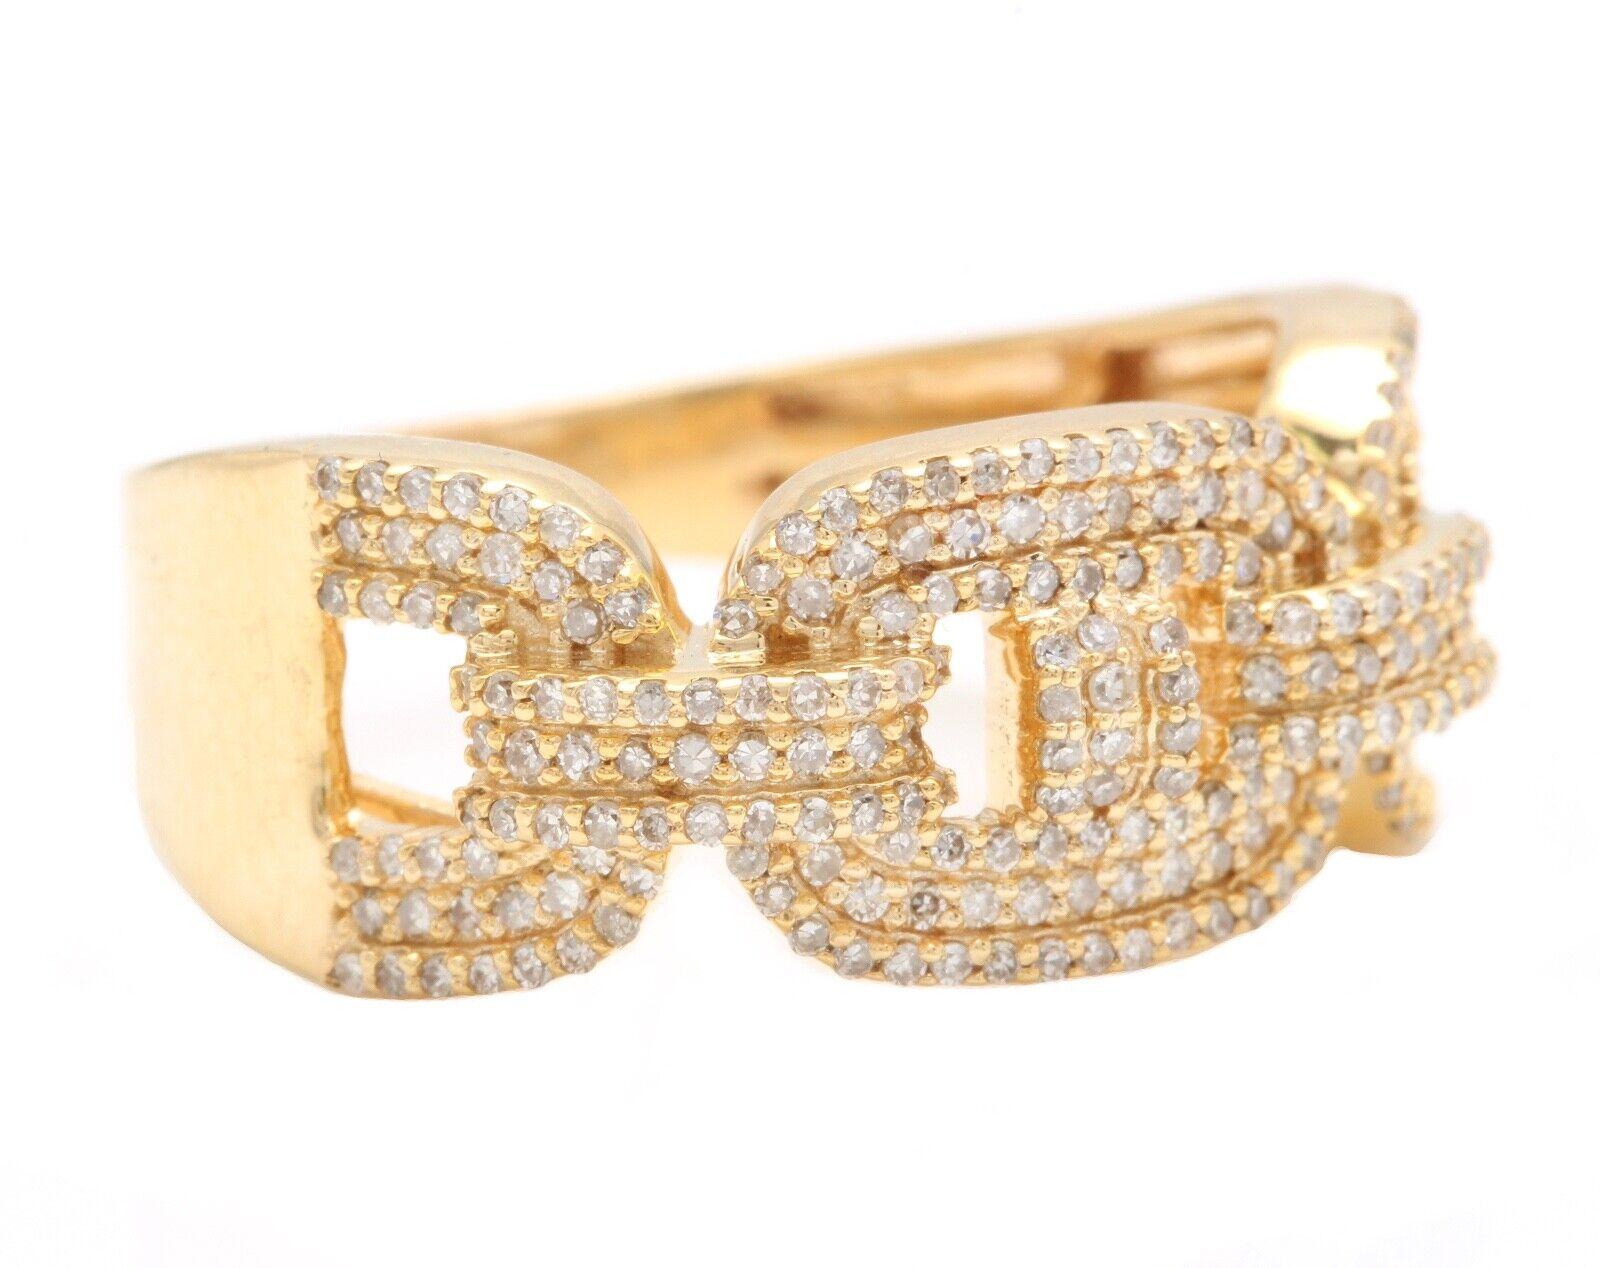 0.70Ct Natural Diamond 10K Solid Yellow Gold Men's Ring

Amazing looking piece!

Suggested Replacement Value Approx. 5,000.00

Total Natural Round Cut Diamonds Weight: Approx. 0.70 Carats (color H / Clarity SI-I1)

Width of the ring: 9.40 mm

Ring